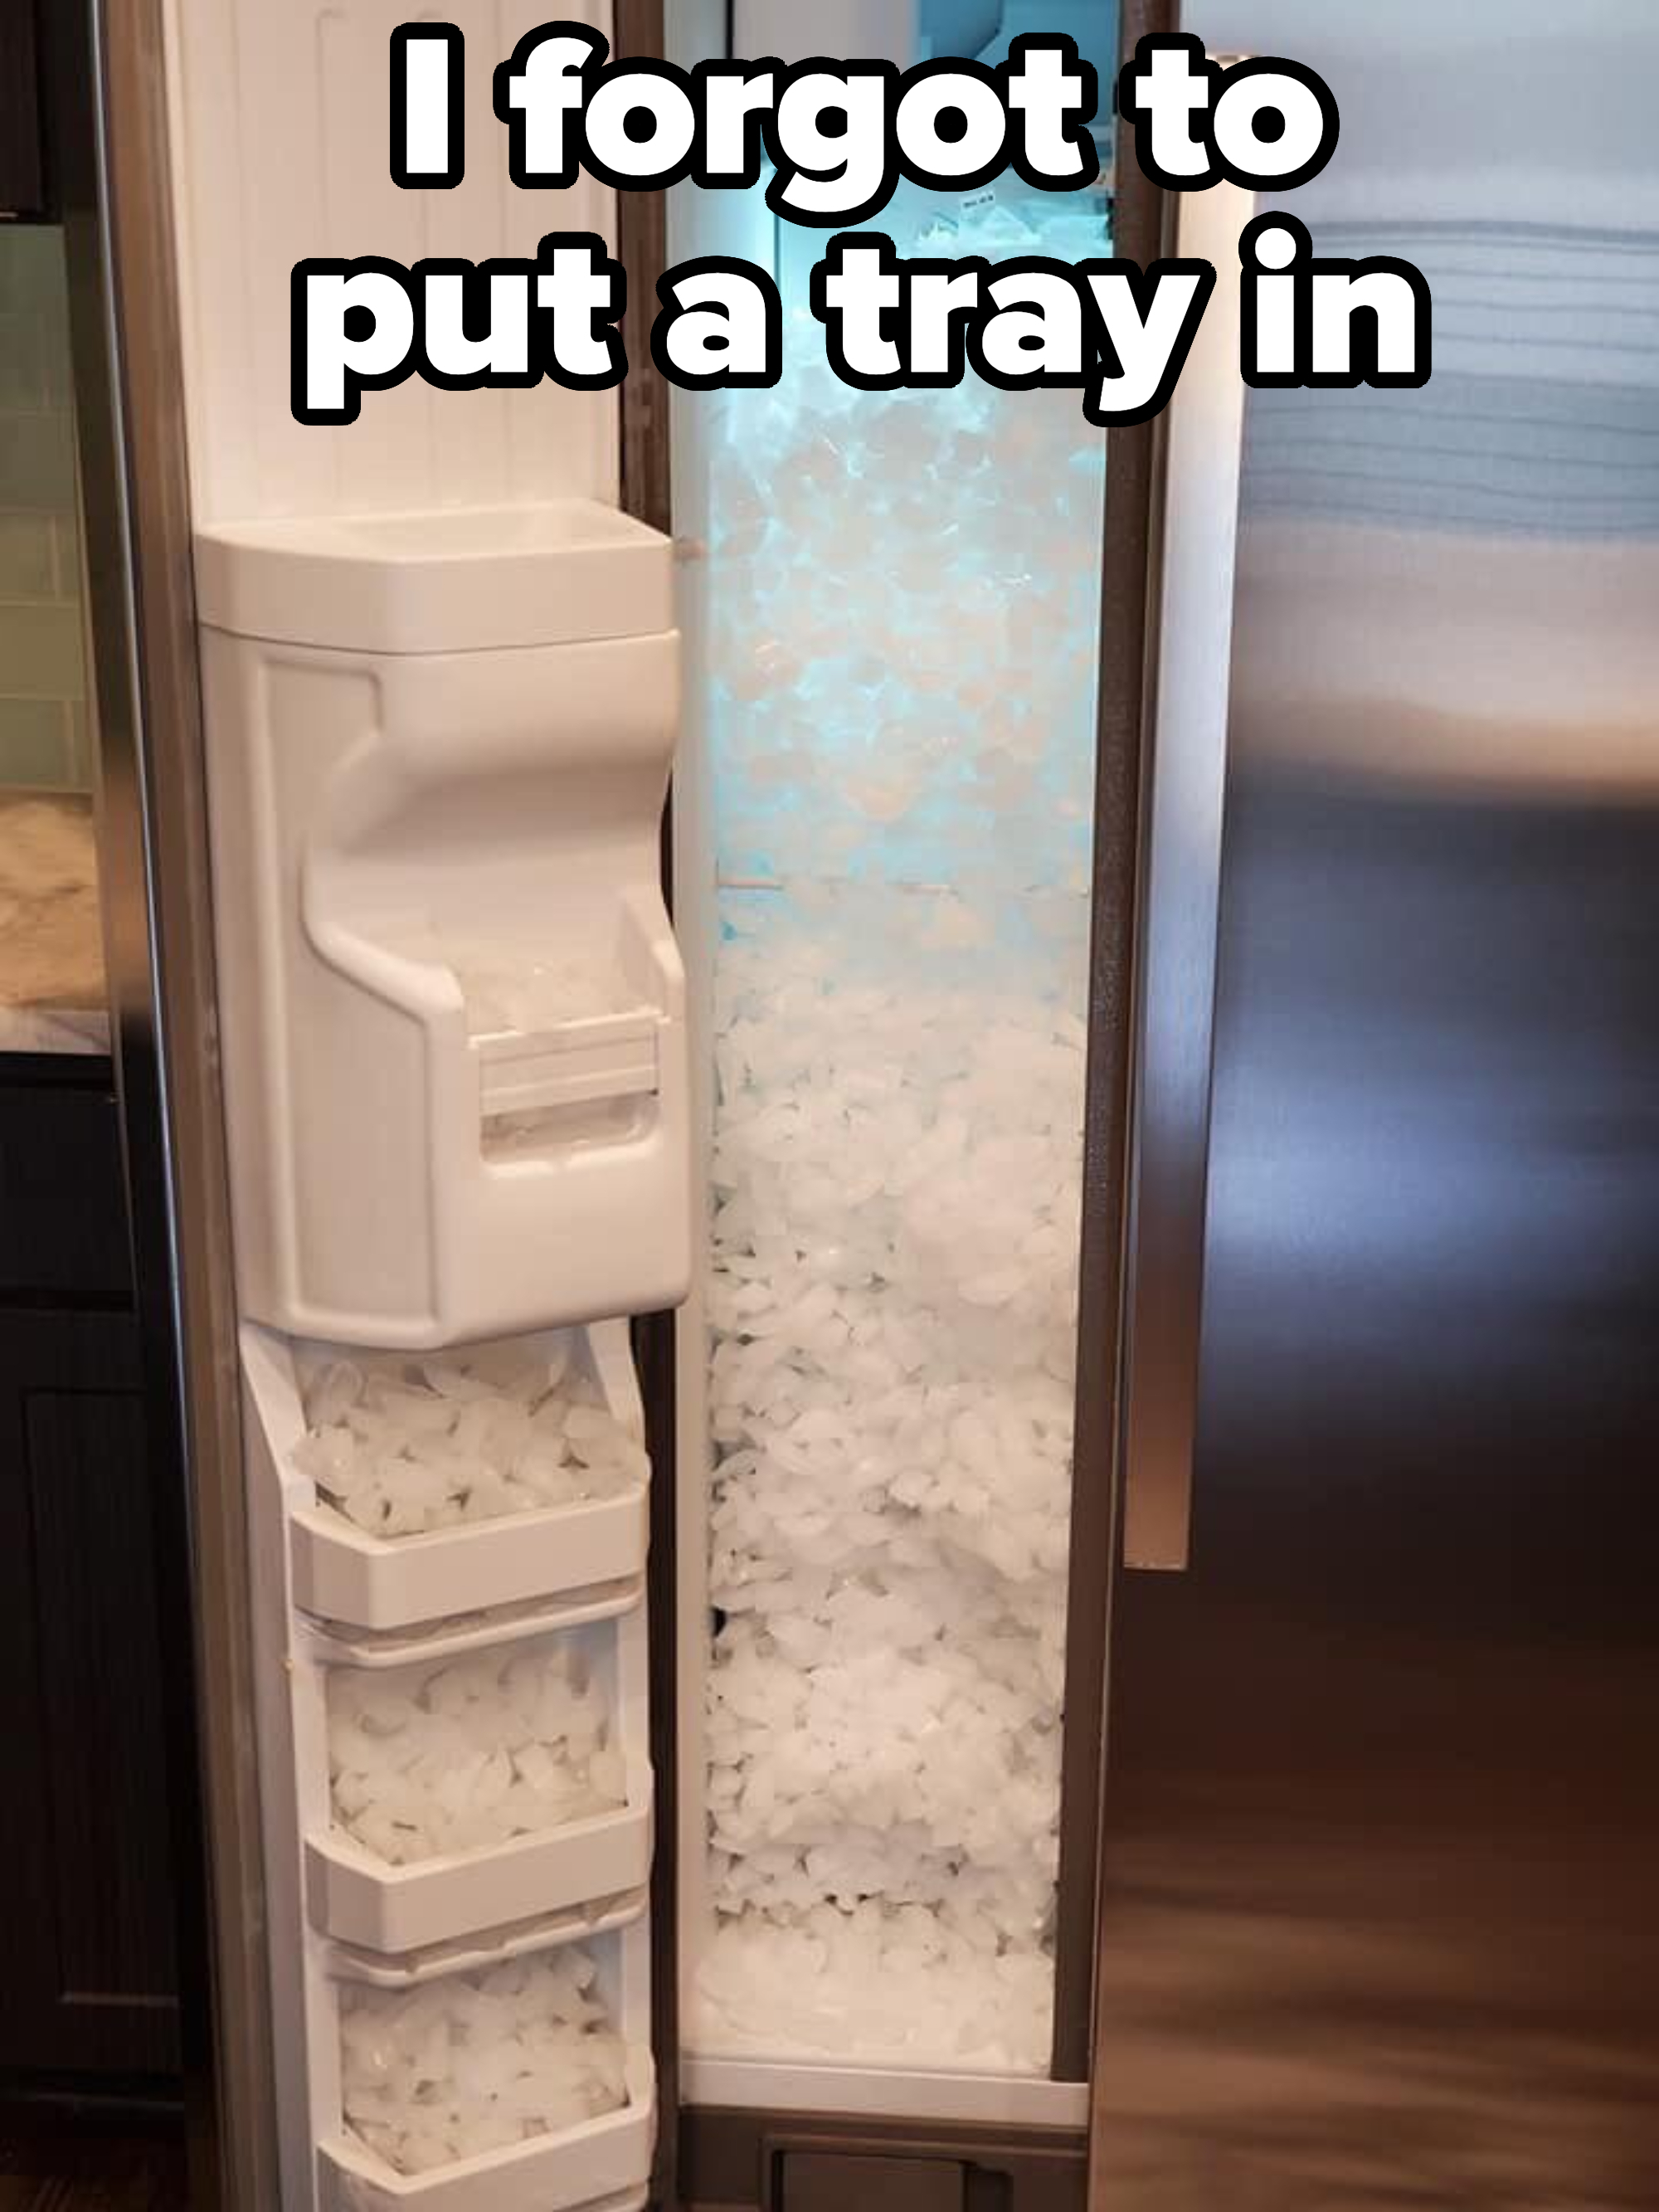 Refrigerator with an overstuffed ice dispenser, ice spilling out into interior, because person didn&#x27;t put a tray in